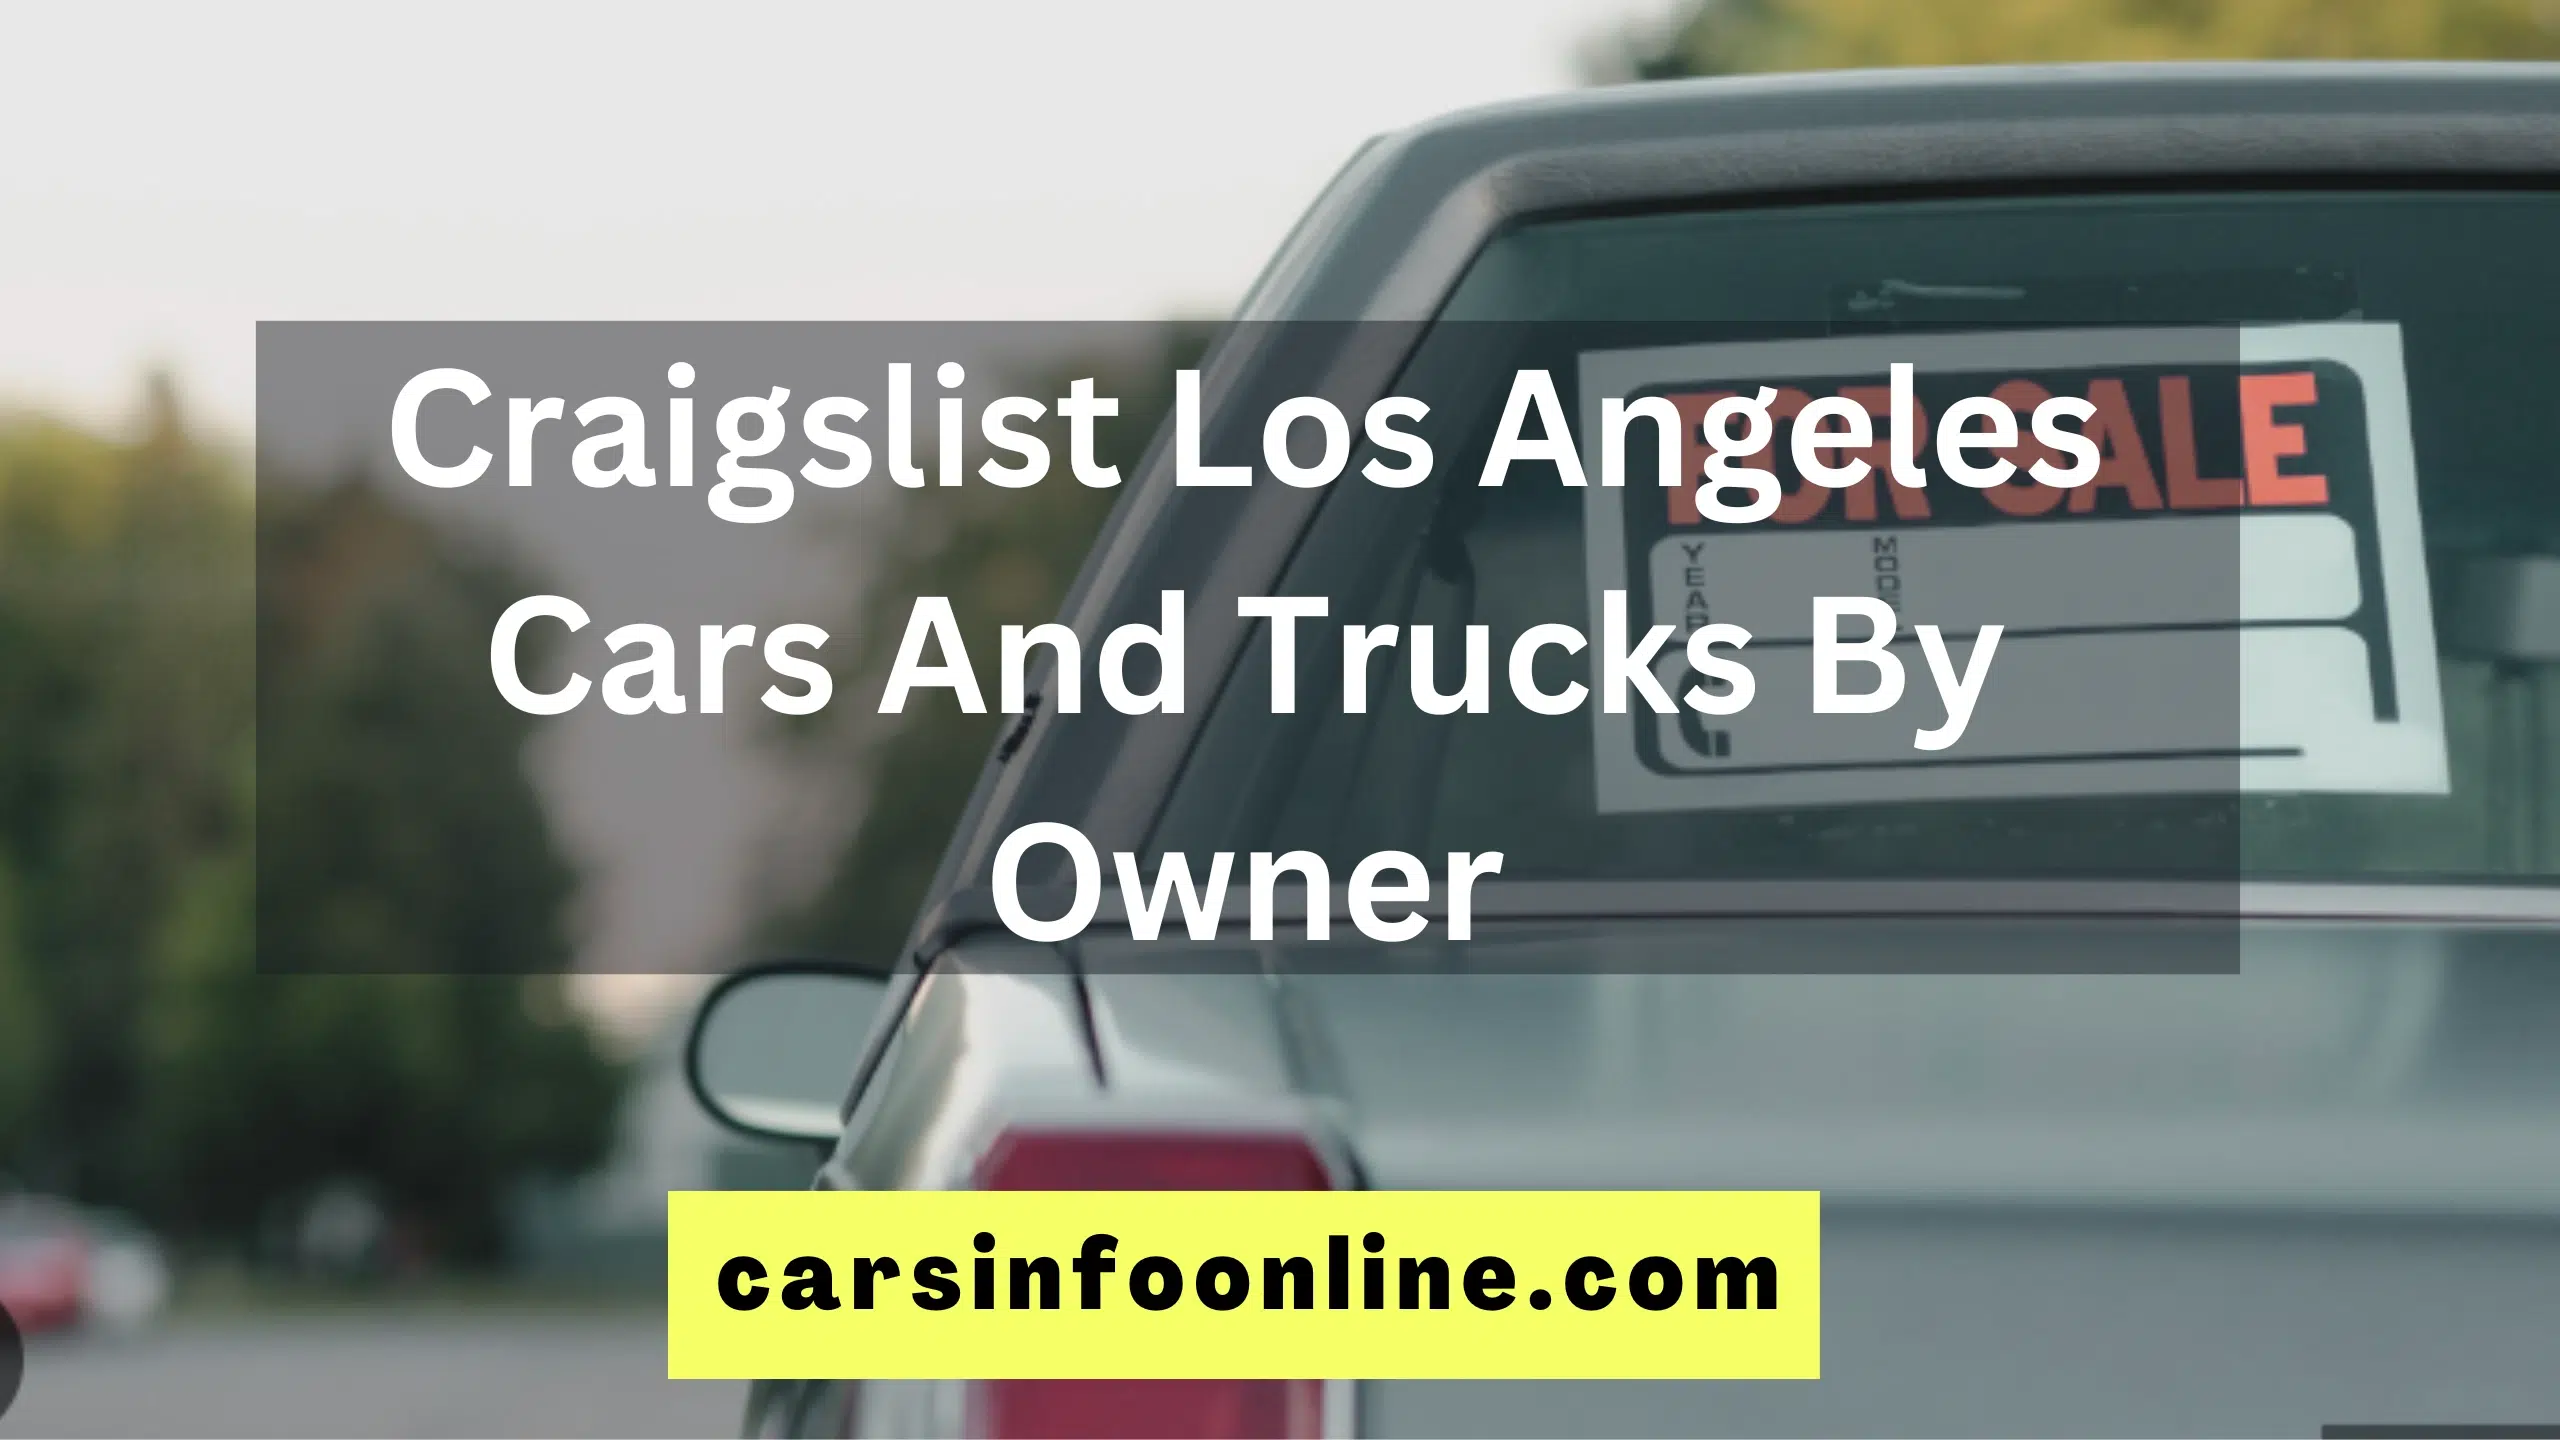 Craigslist Los Angeles Cars And Trucks By Owner